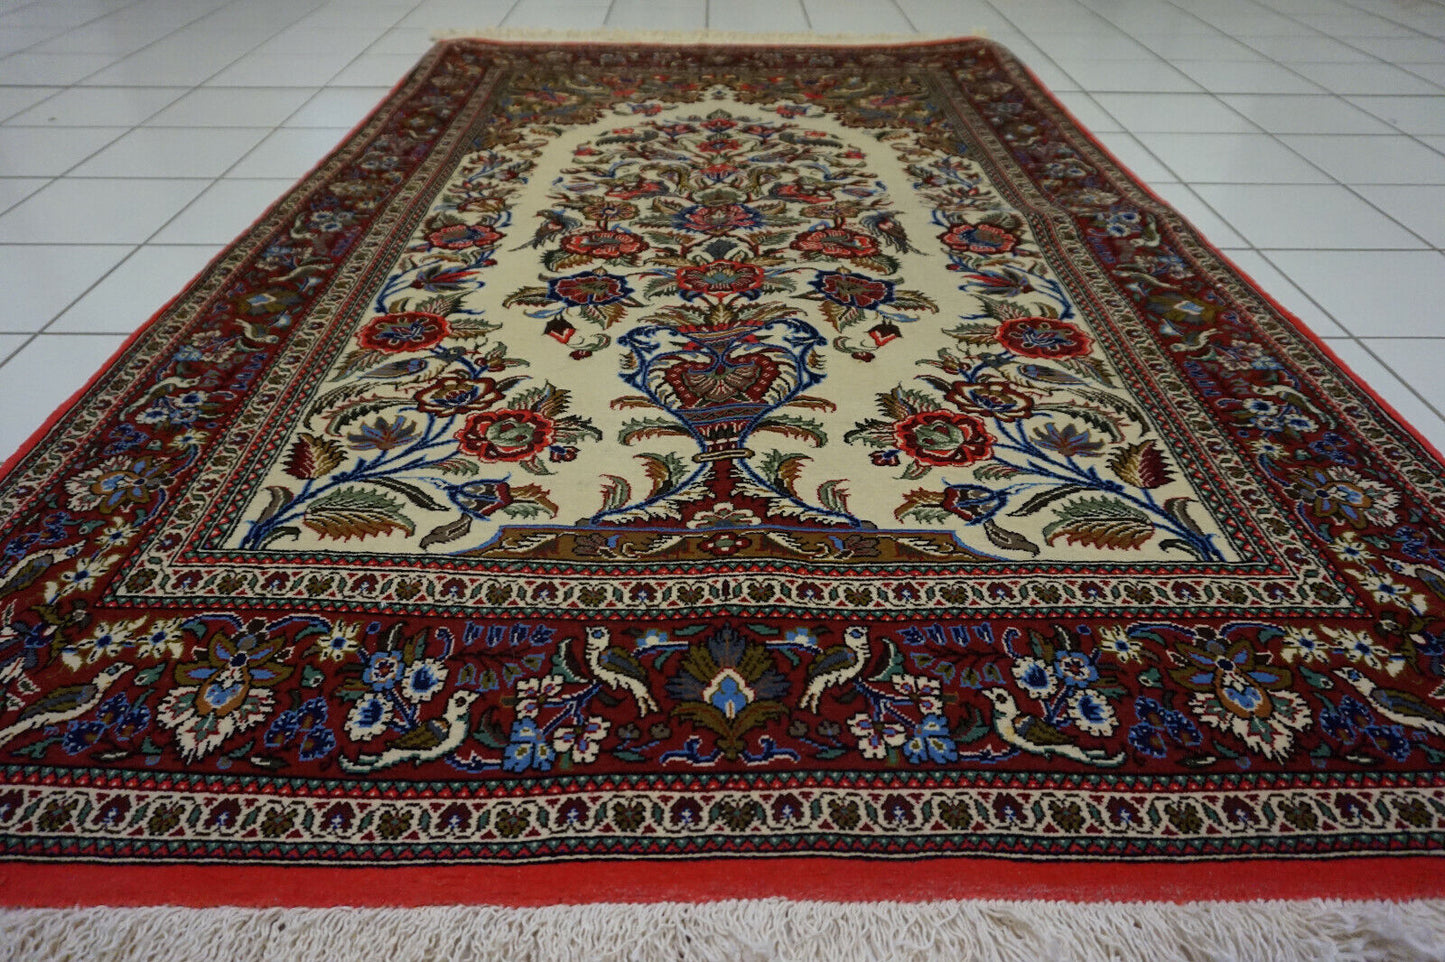 Ivory background showcasing floral patterns on the Prayer Rug